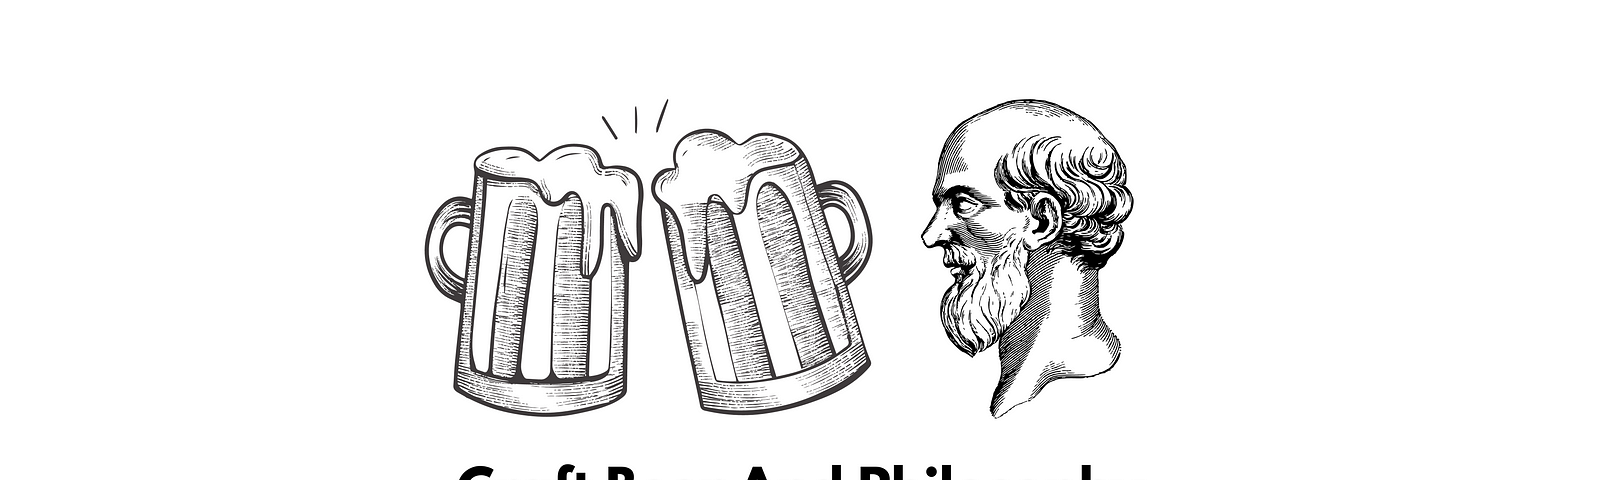 Philosophy and craft beer makes for an epic combination.